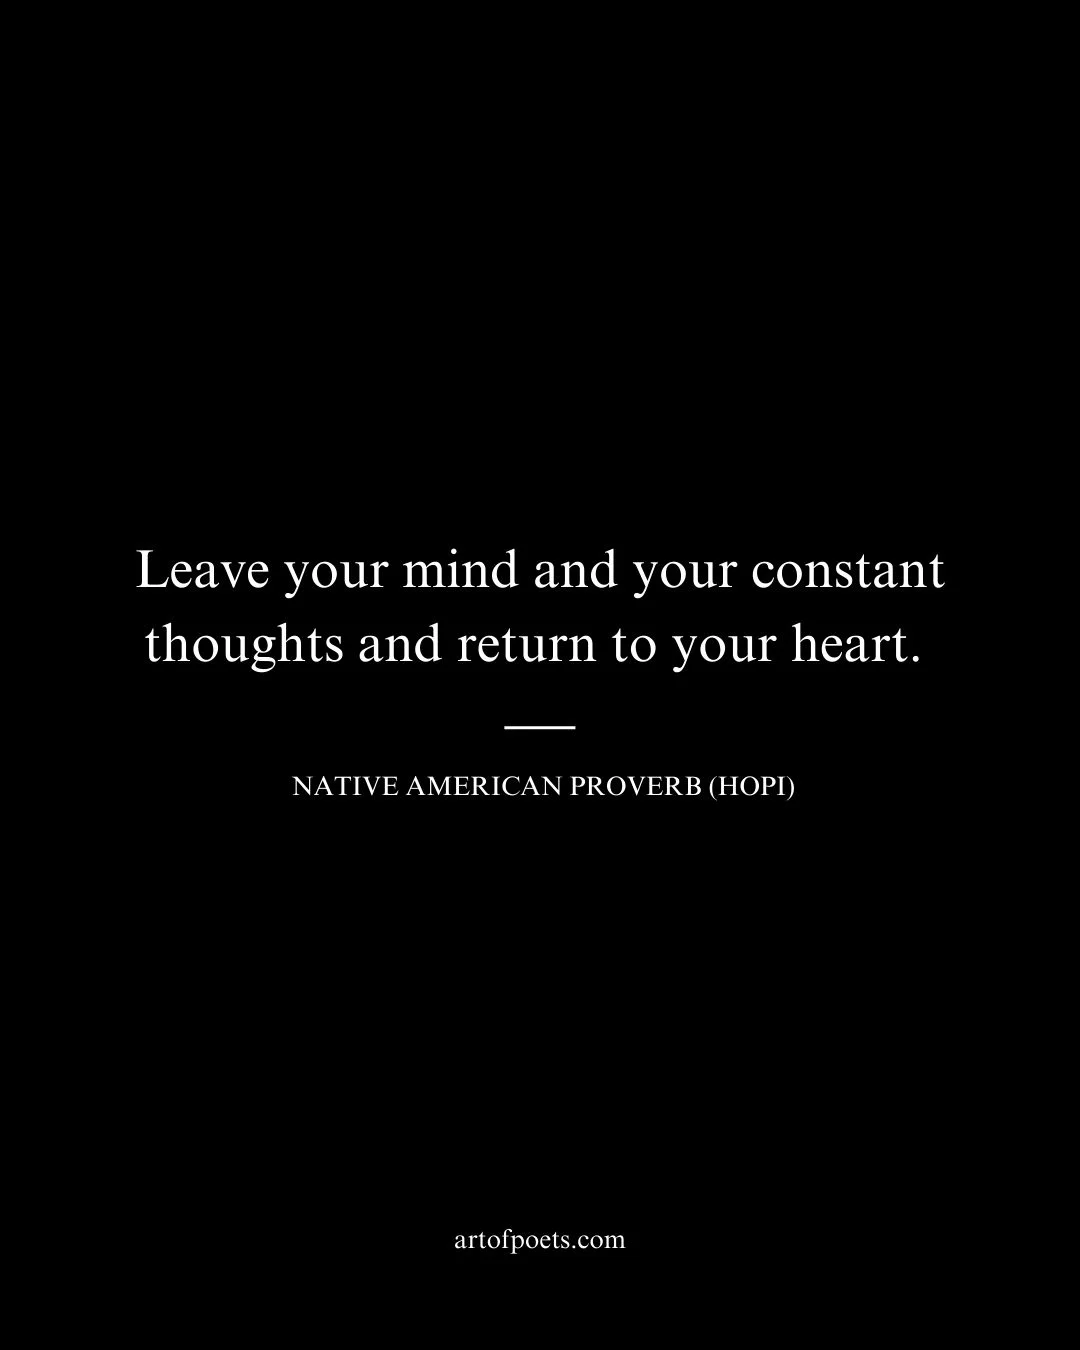 Leave your mind and your constant thoughts and return to your heart